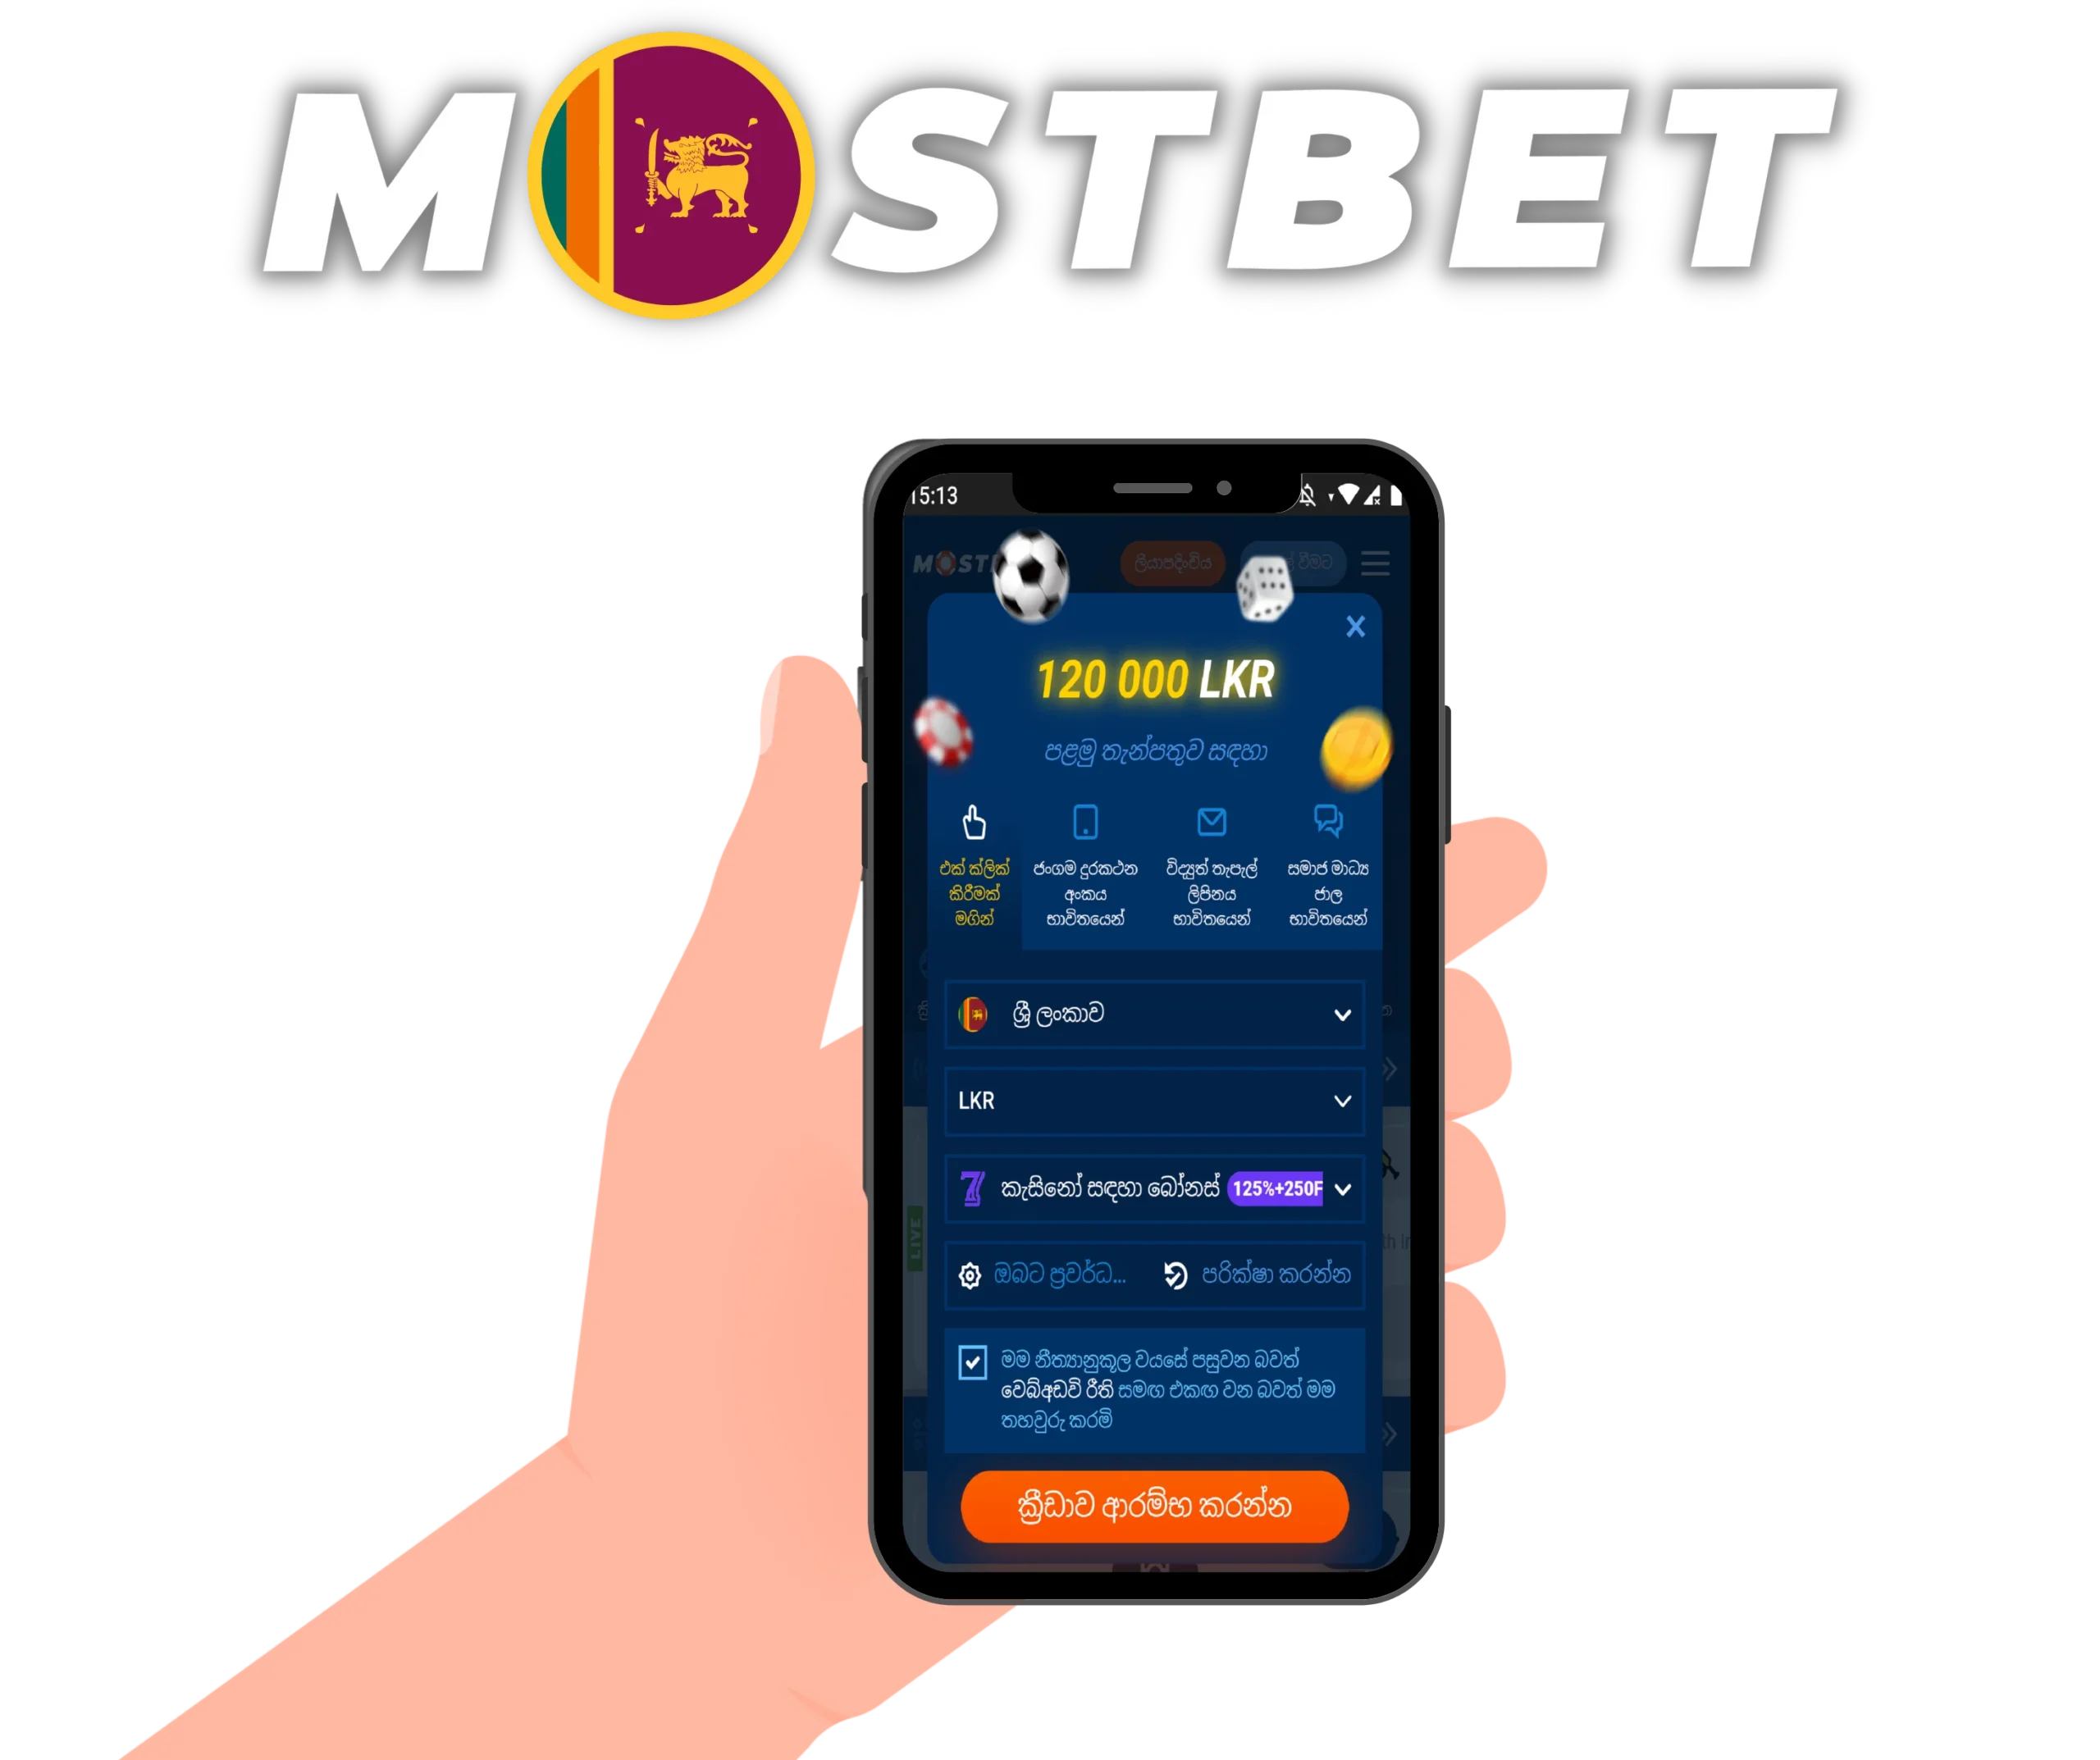 The Advanced Guide To Mostbet Betting and Casino in Tunisia - Play and win big prizes